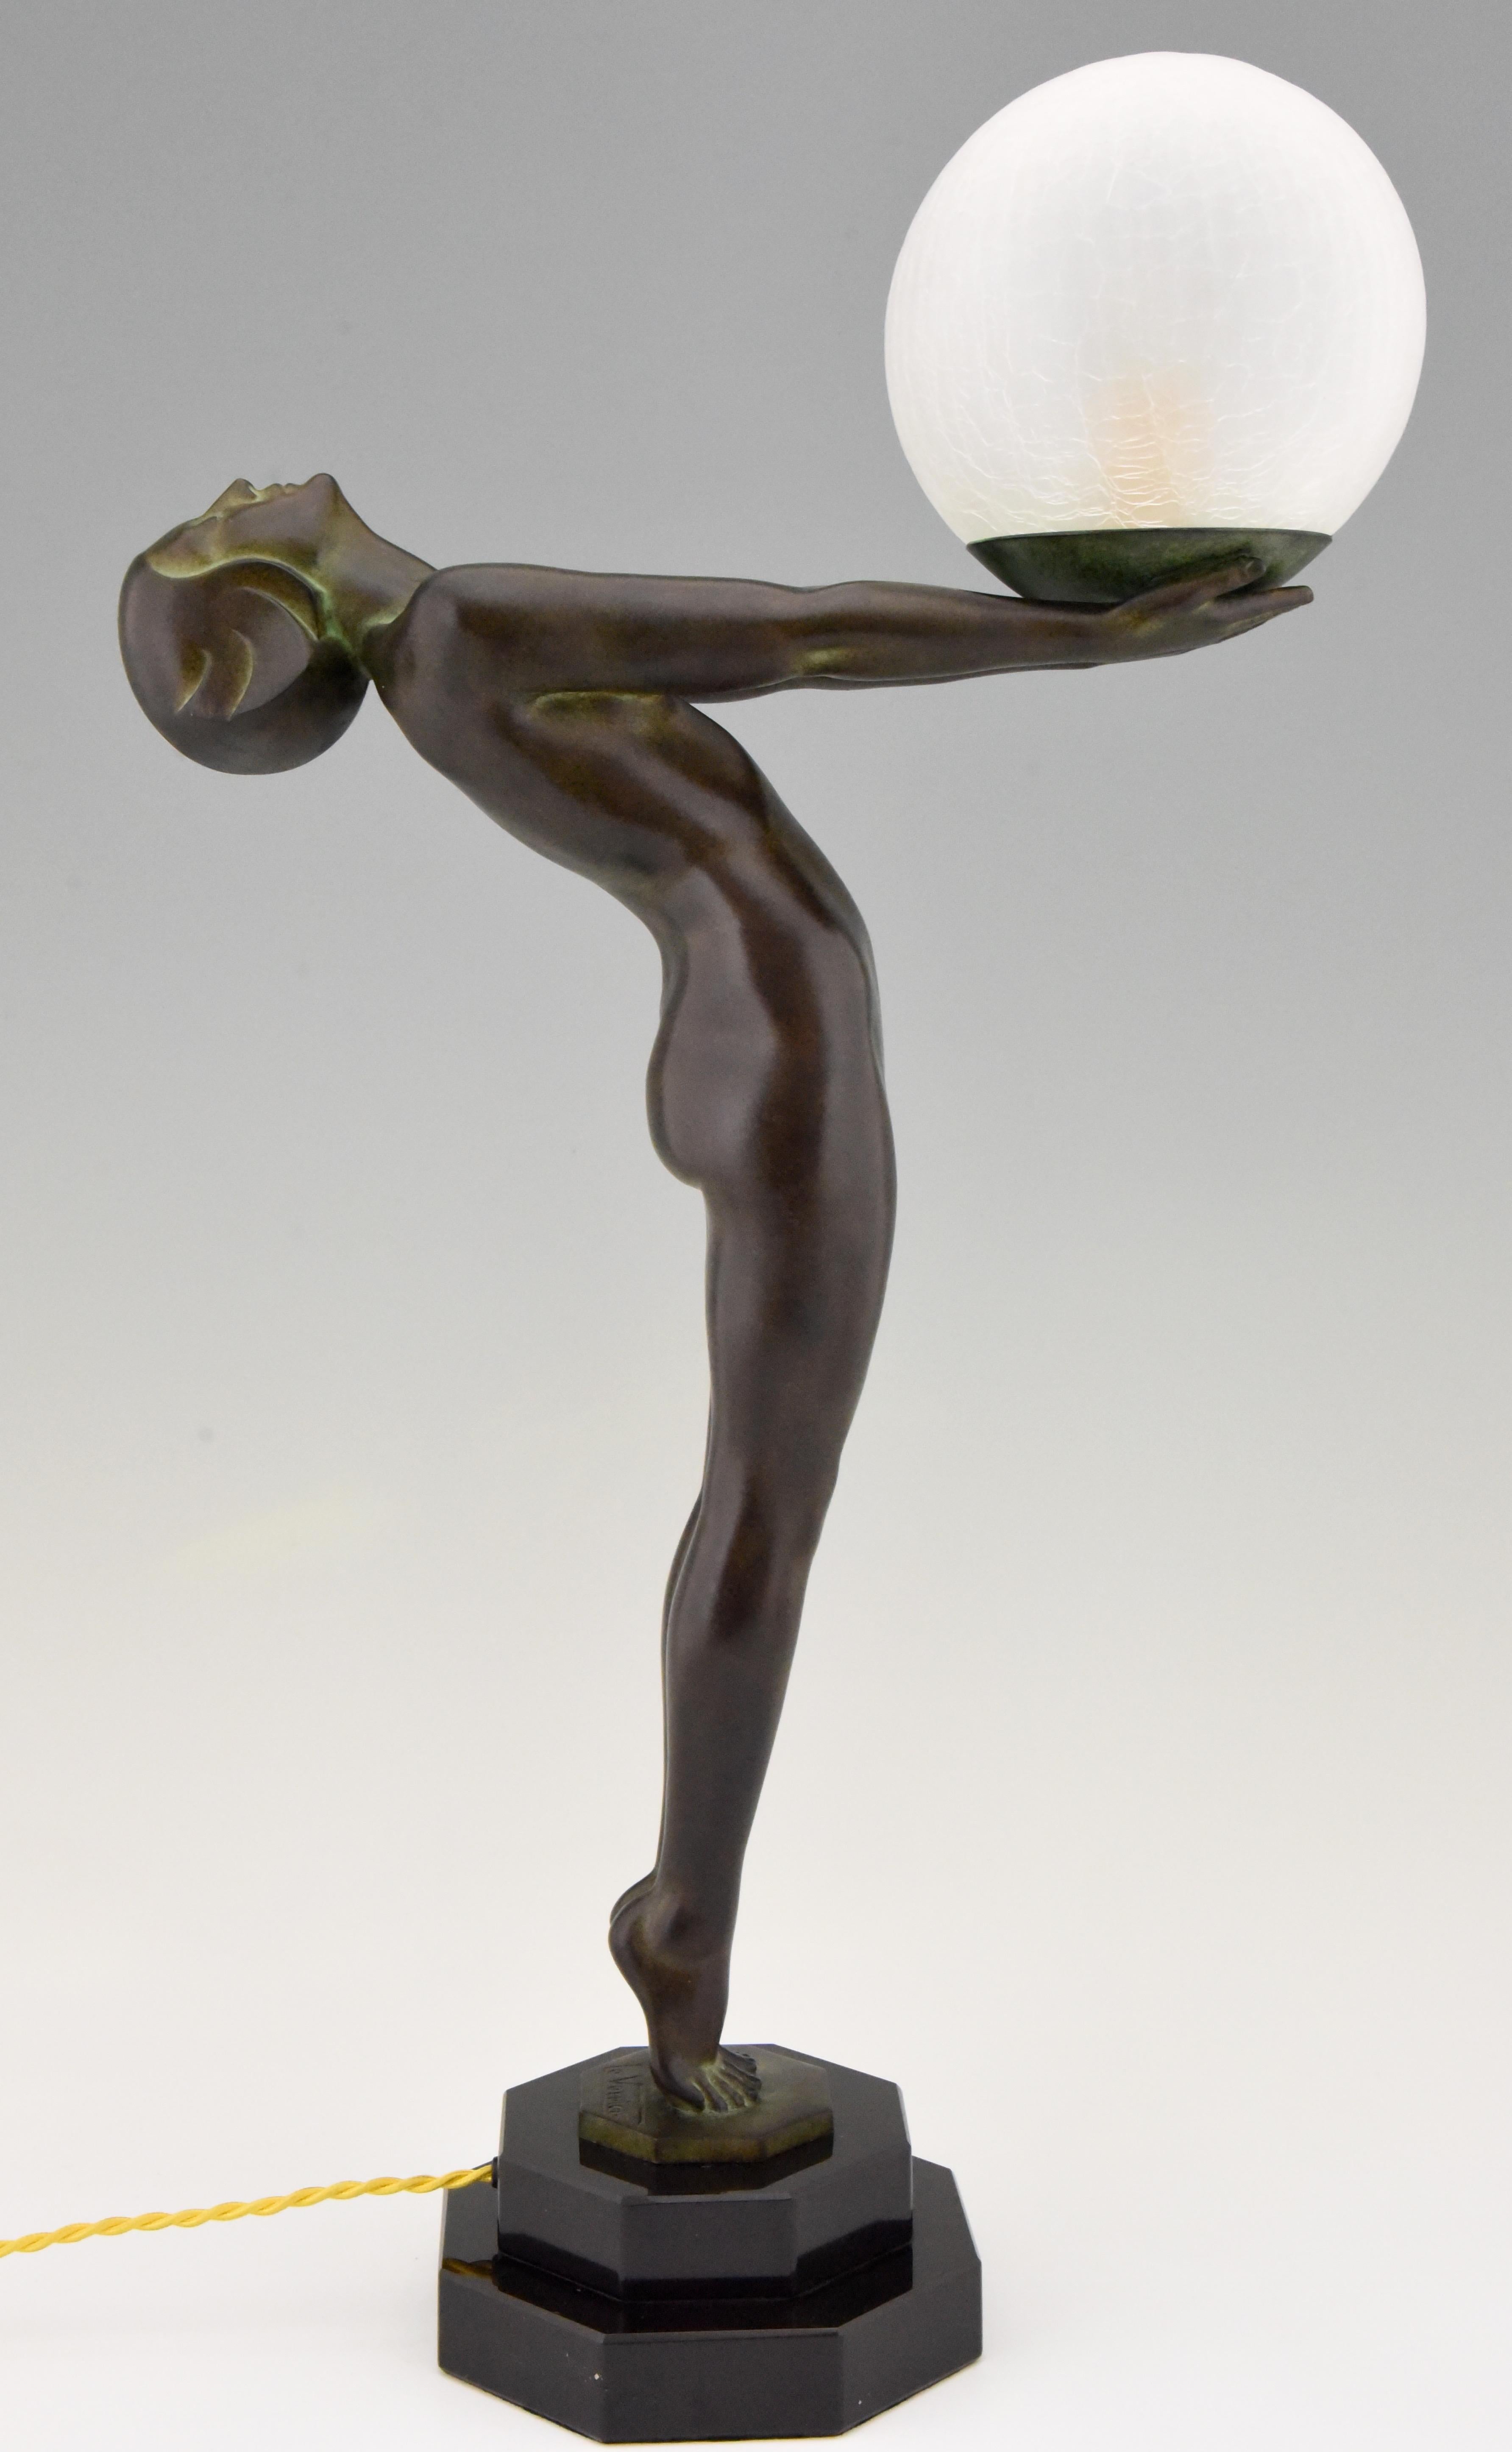 French Art Deco Style Lamp Clarté Standing Nude Sculpture Max Le Verrier H 25 in, 64 cm